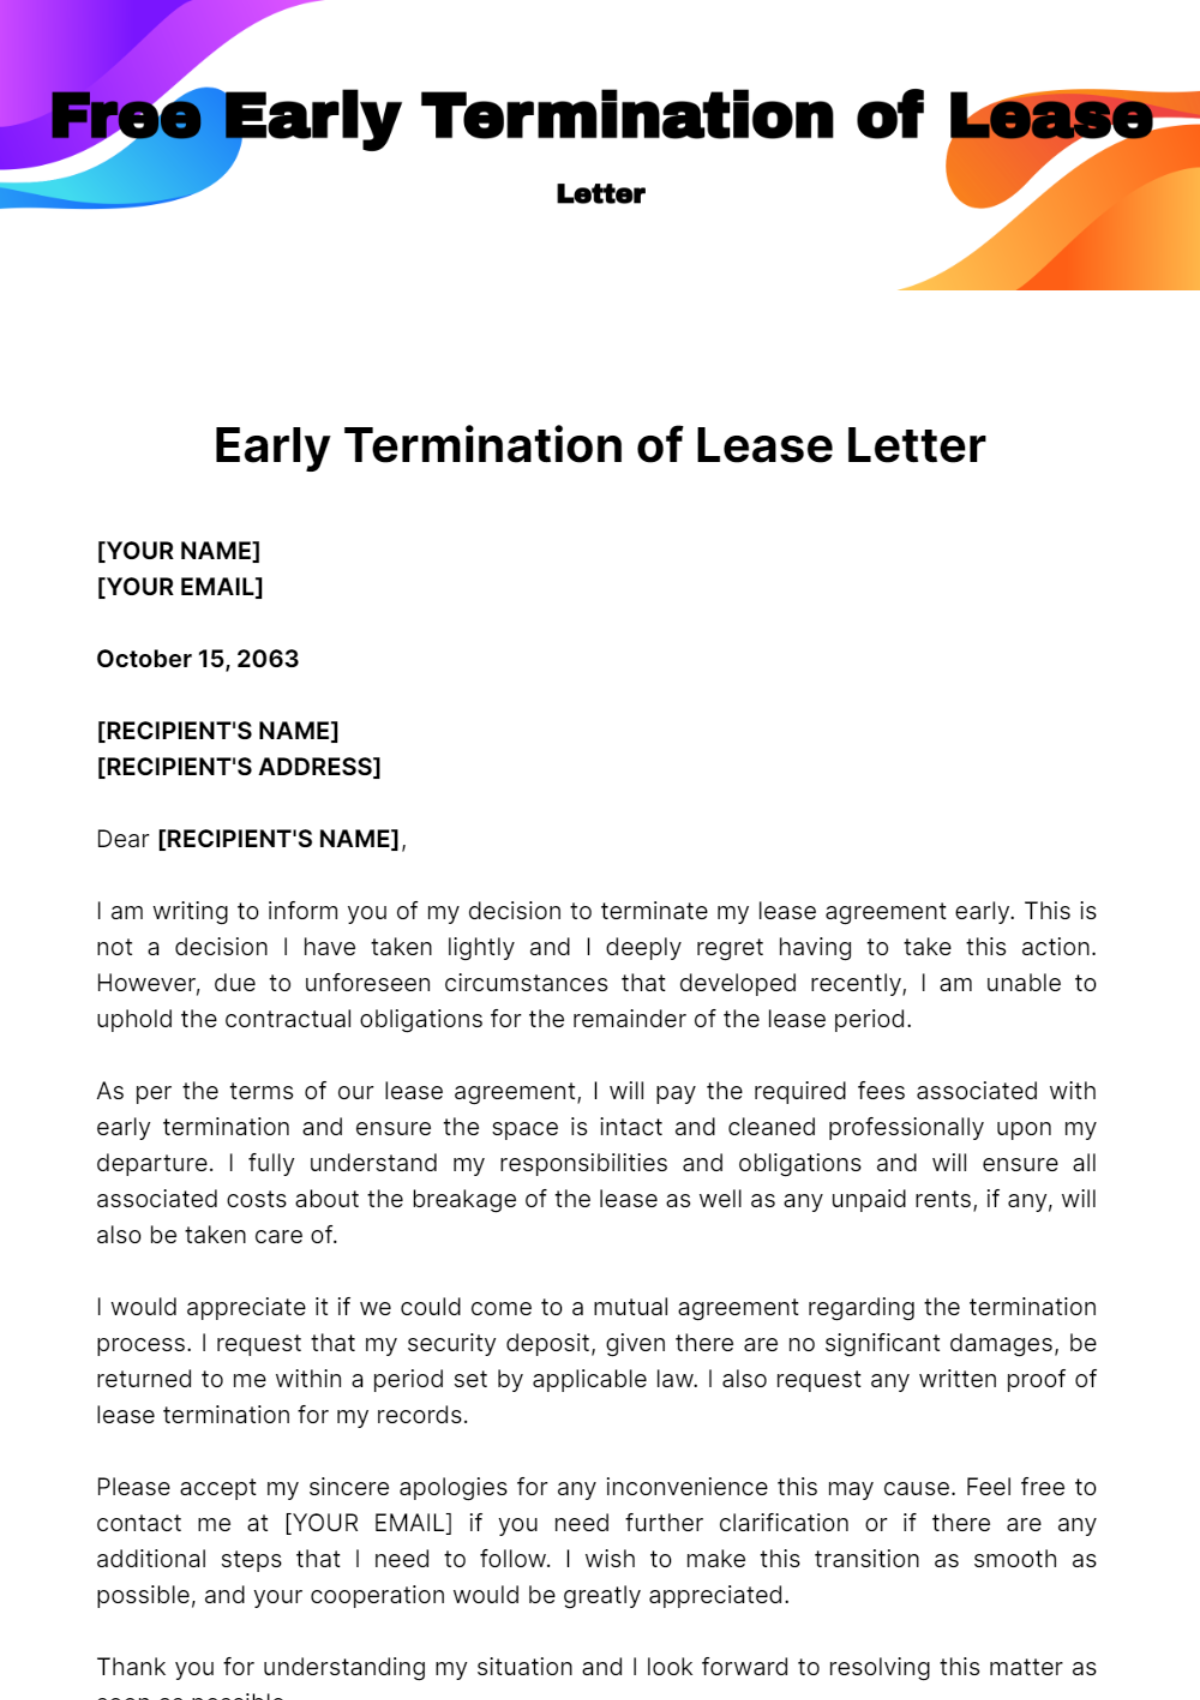 Free Early Termination of Lease Letter Template